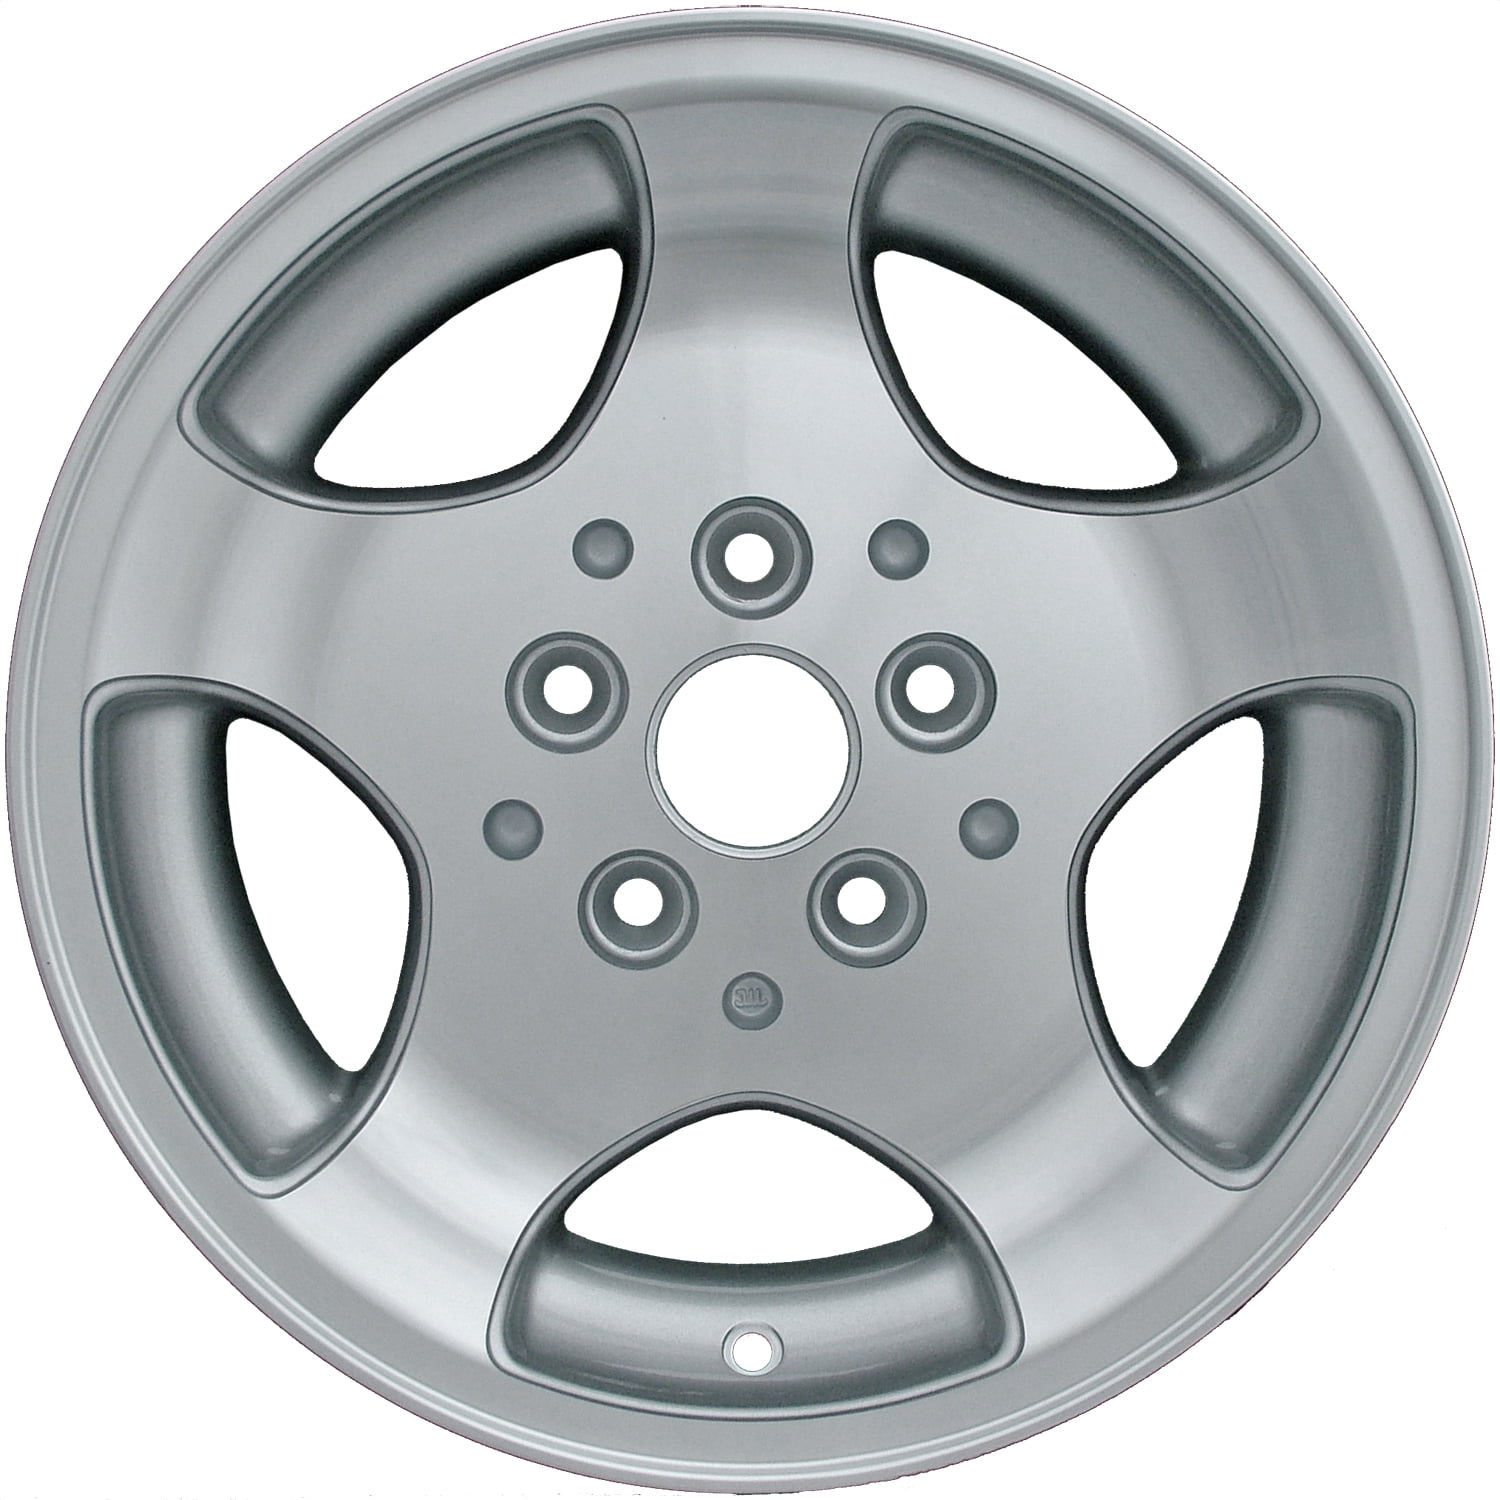 15 X 7 Reconditioned OEM Aluminum Alloy Wheel, Argent, Fits 1996-1998 Jeep  Grand Cherokee 